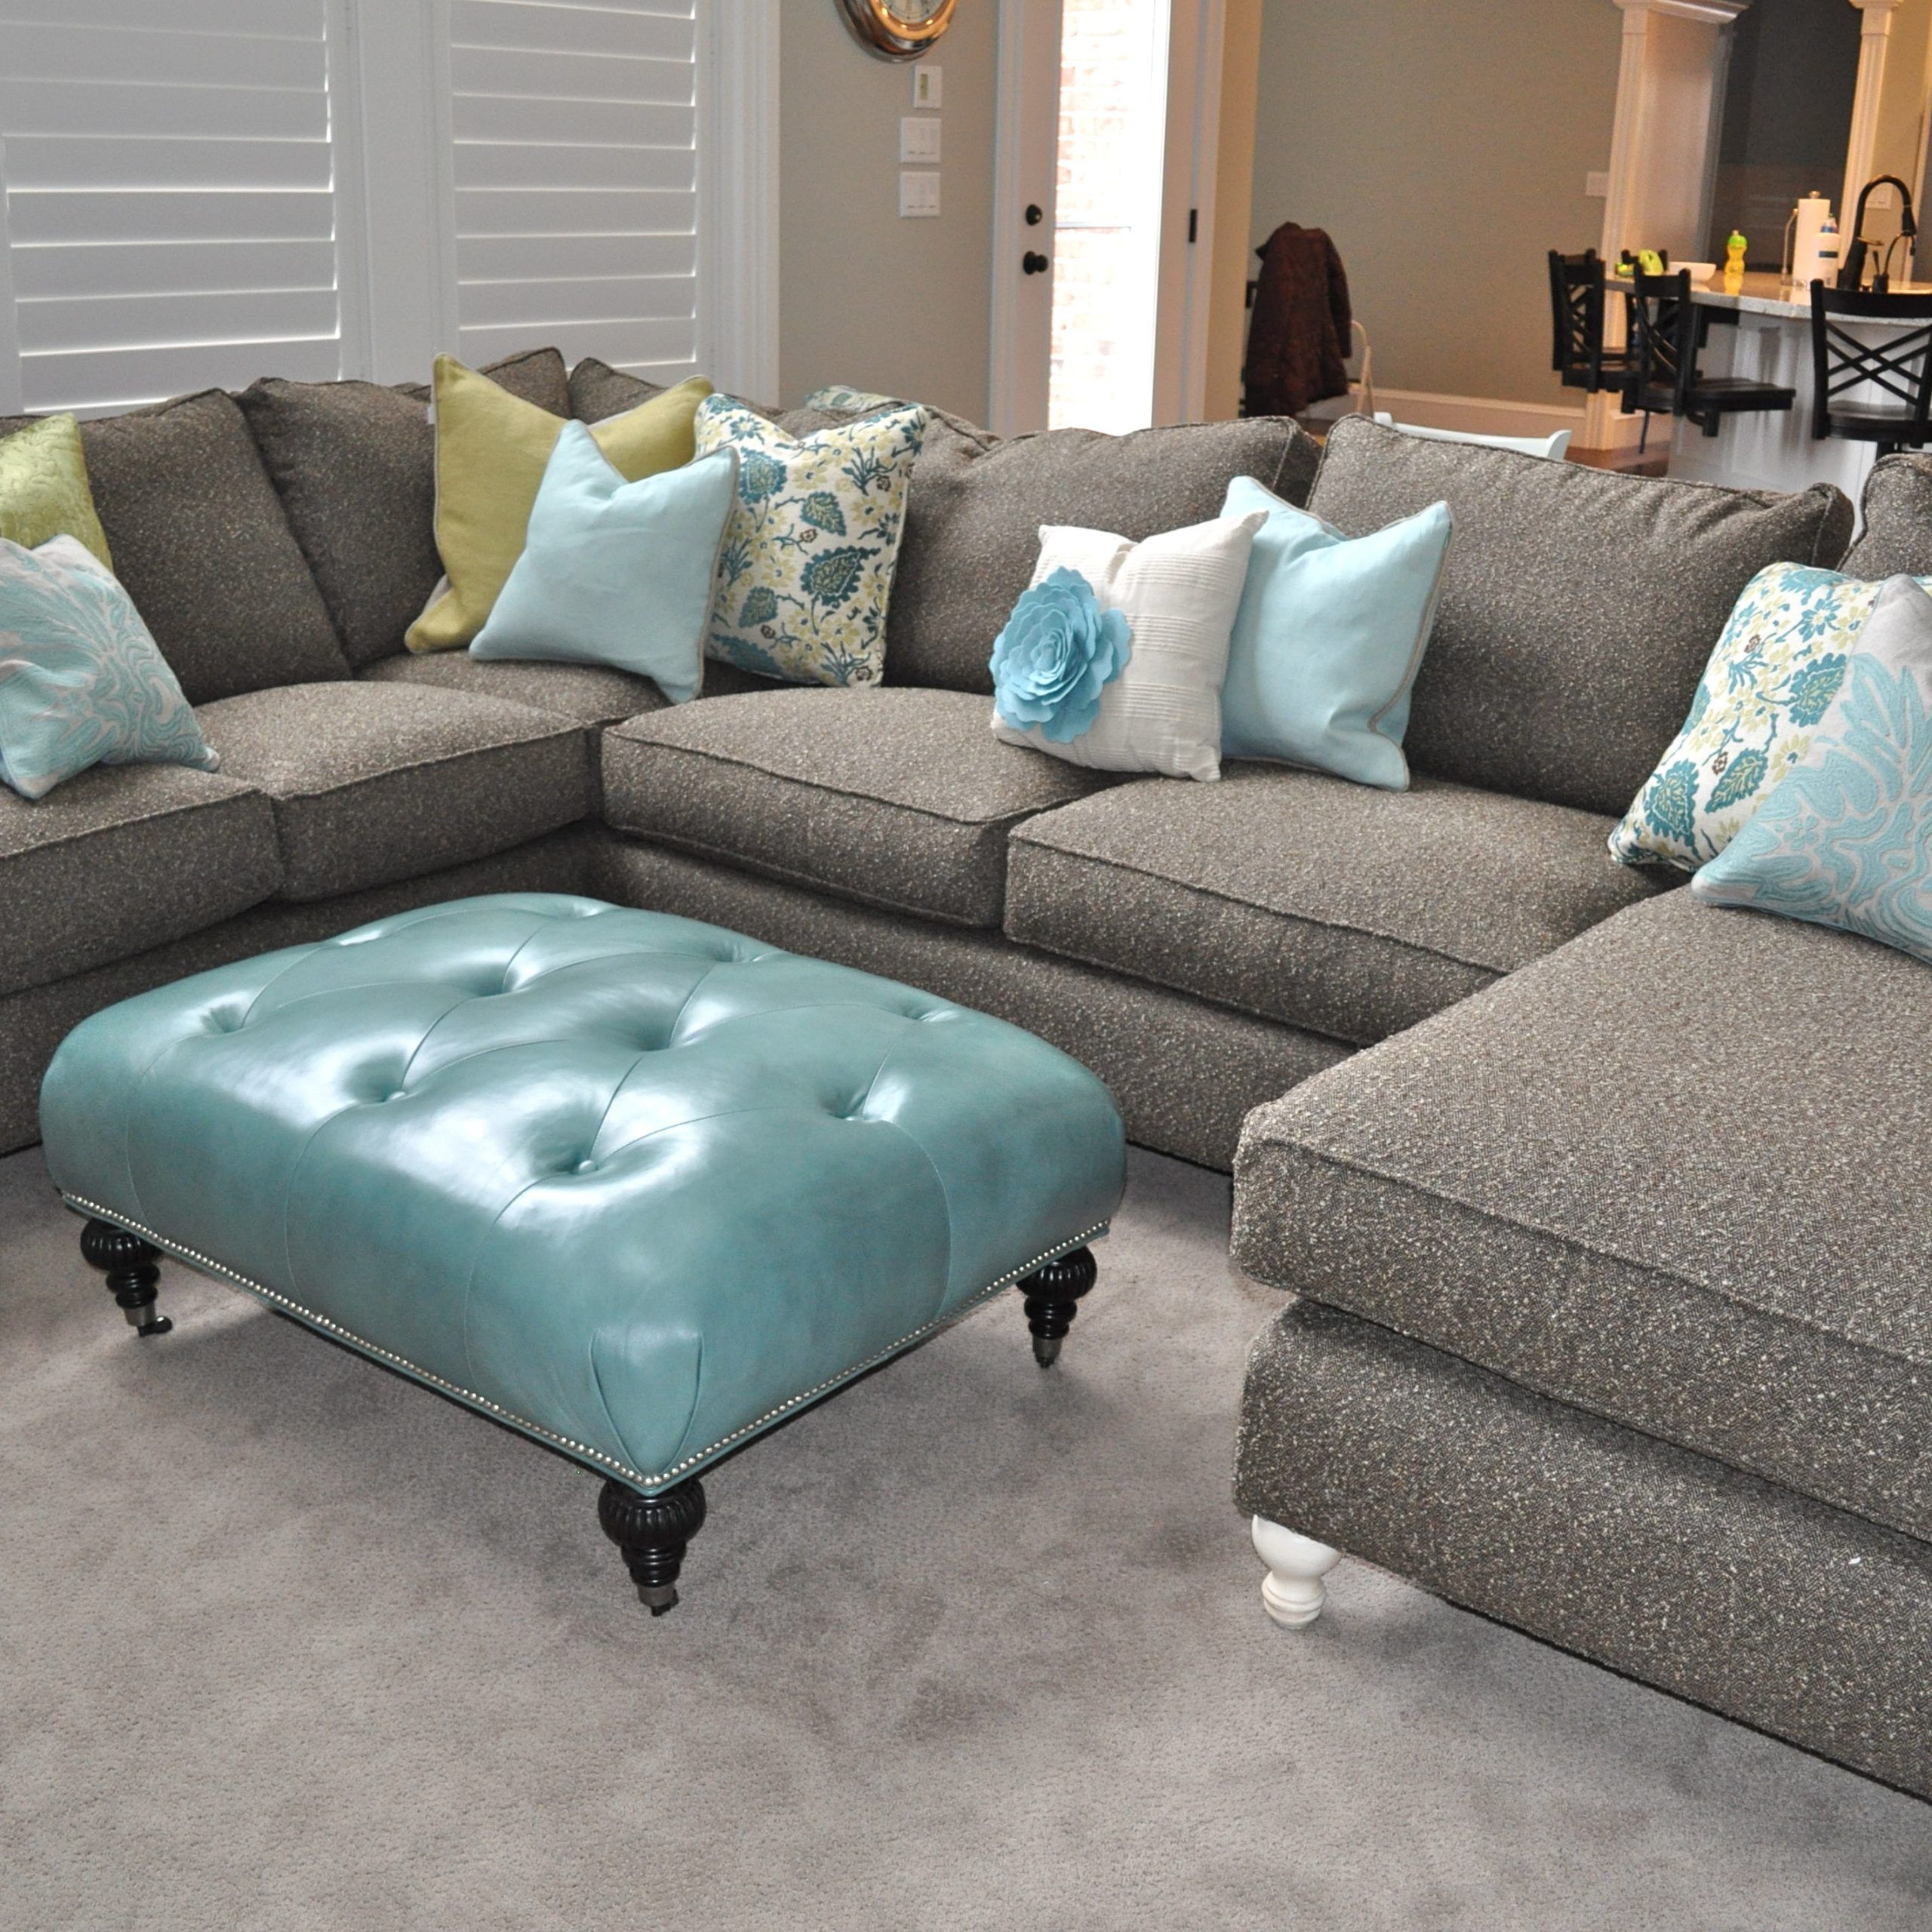 U Shaped Sectional With Chaise Design – Homesfeed Intended For 2017 Modern U Shape Sectional Sofas In Gray (View 5 of 15)